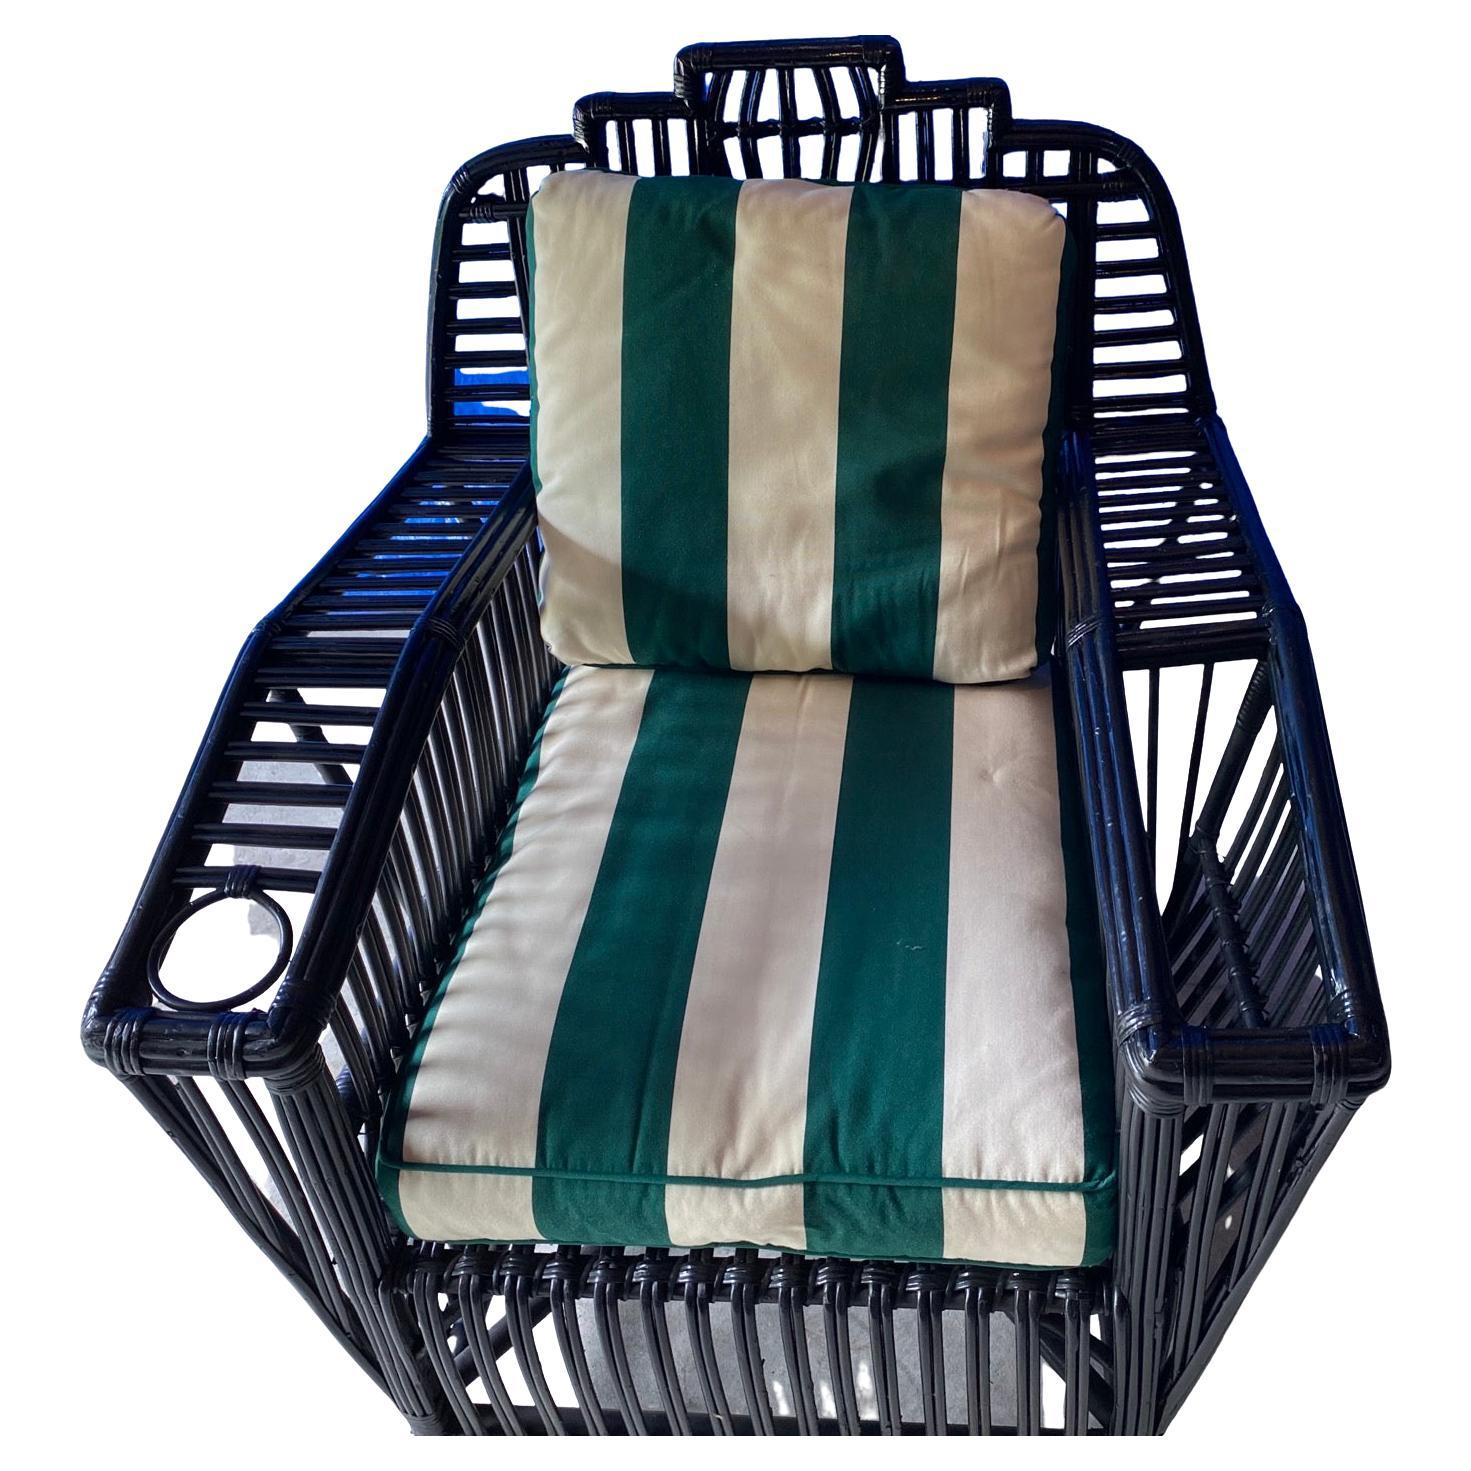 Remembrance of the glamour days at Newport or Palm Beach, this grand scale stick wicker arm chair with stripped cushion making it an inviting to enjoy a leisurely day with a drink and reading a book. A hole in one arm for a drinking glass and a